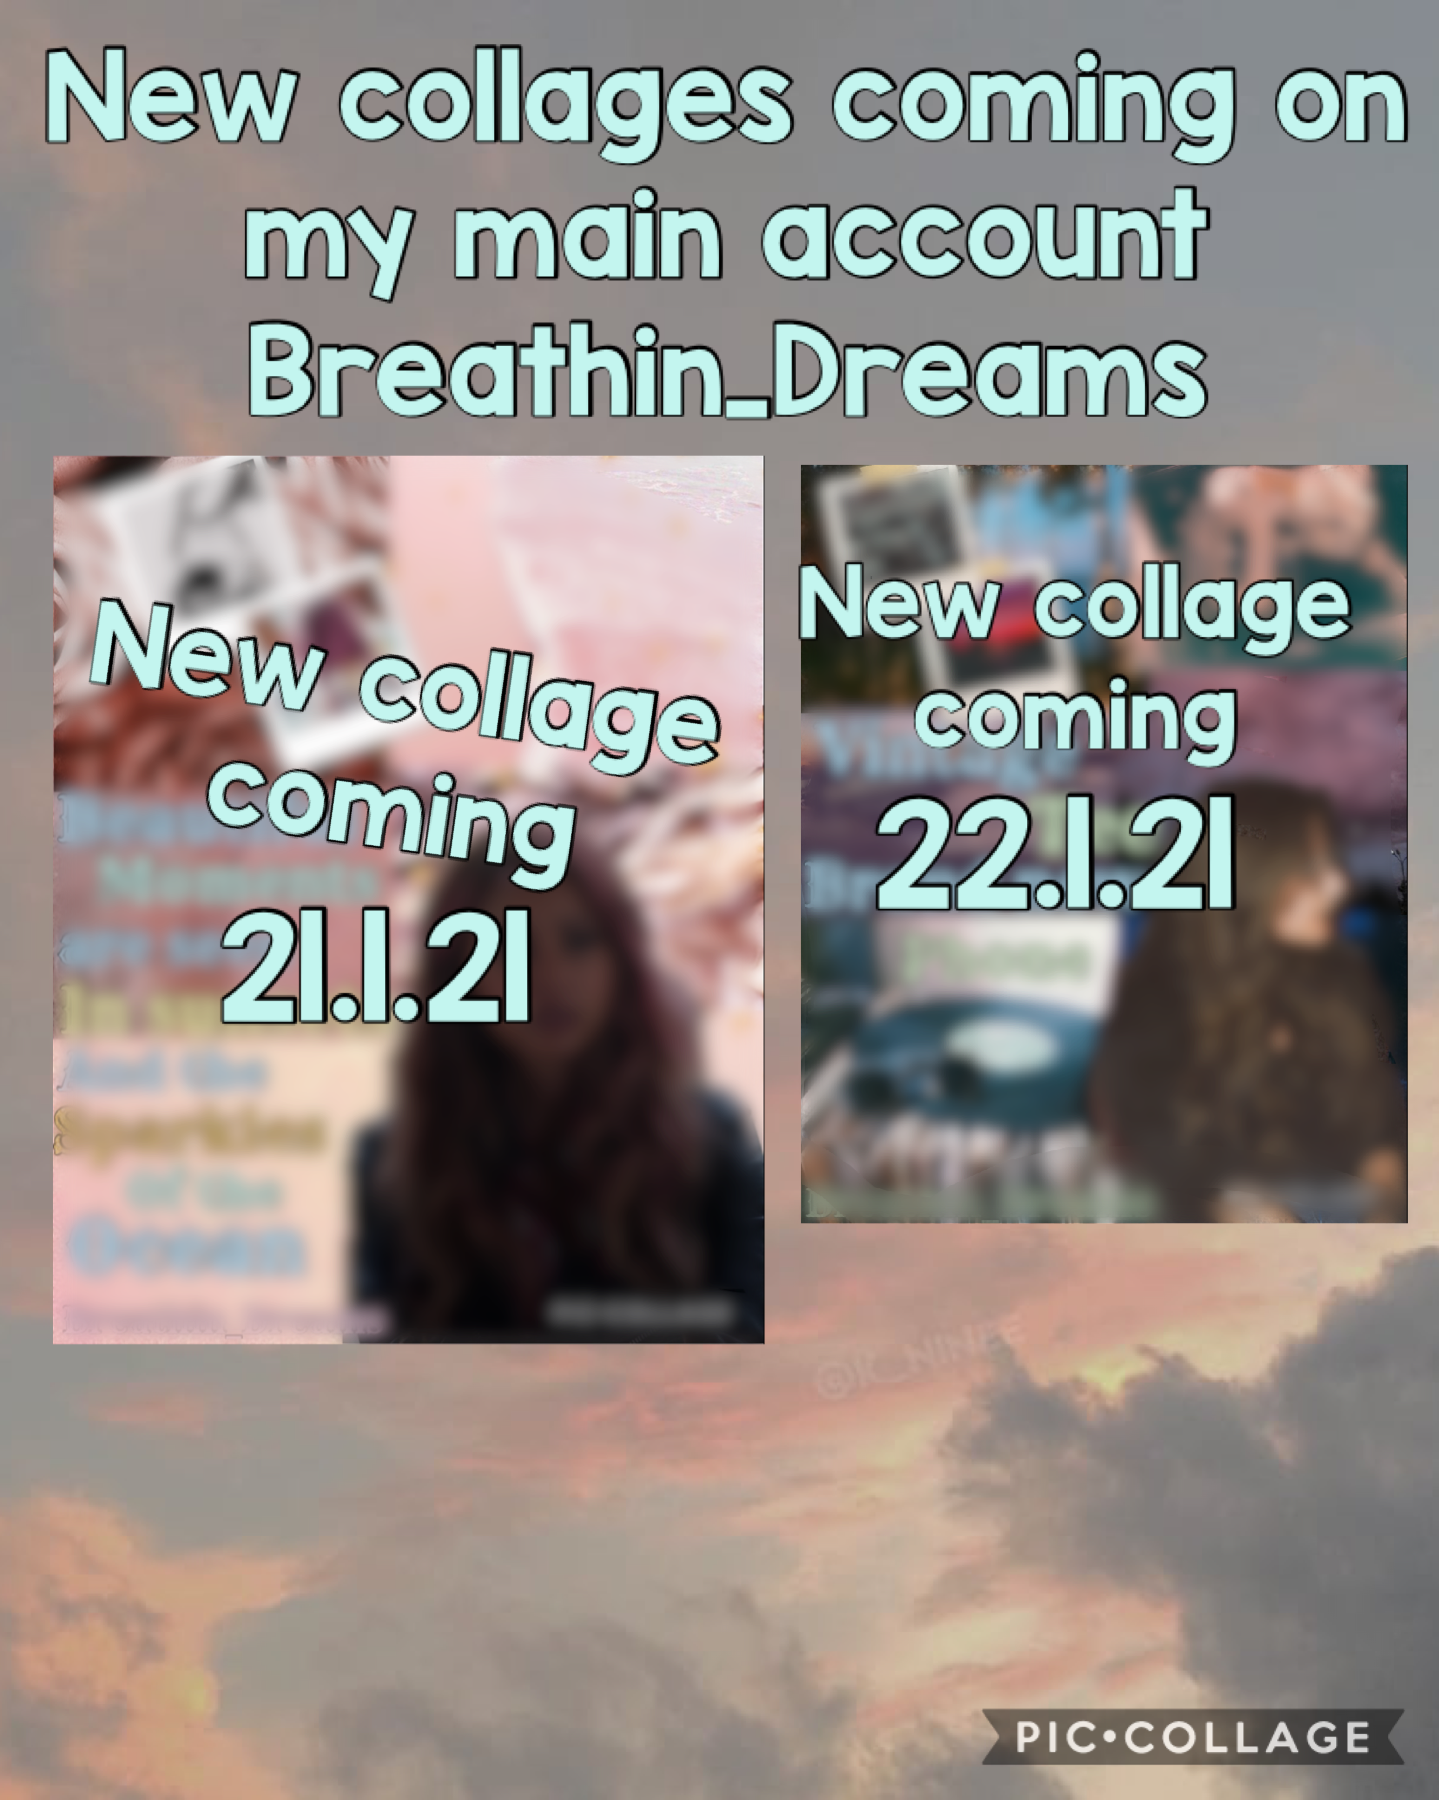 New collages coming to my account Breathin_Dreams